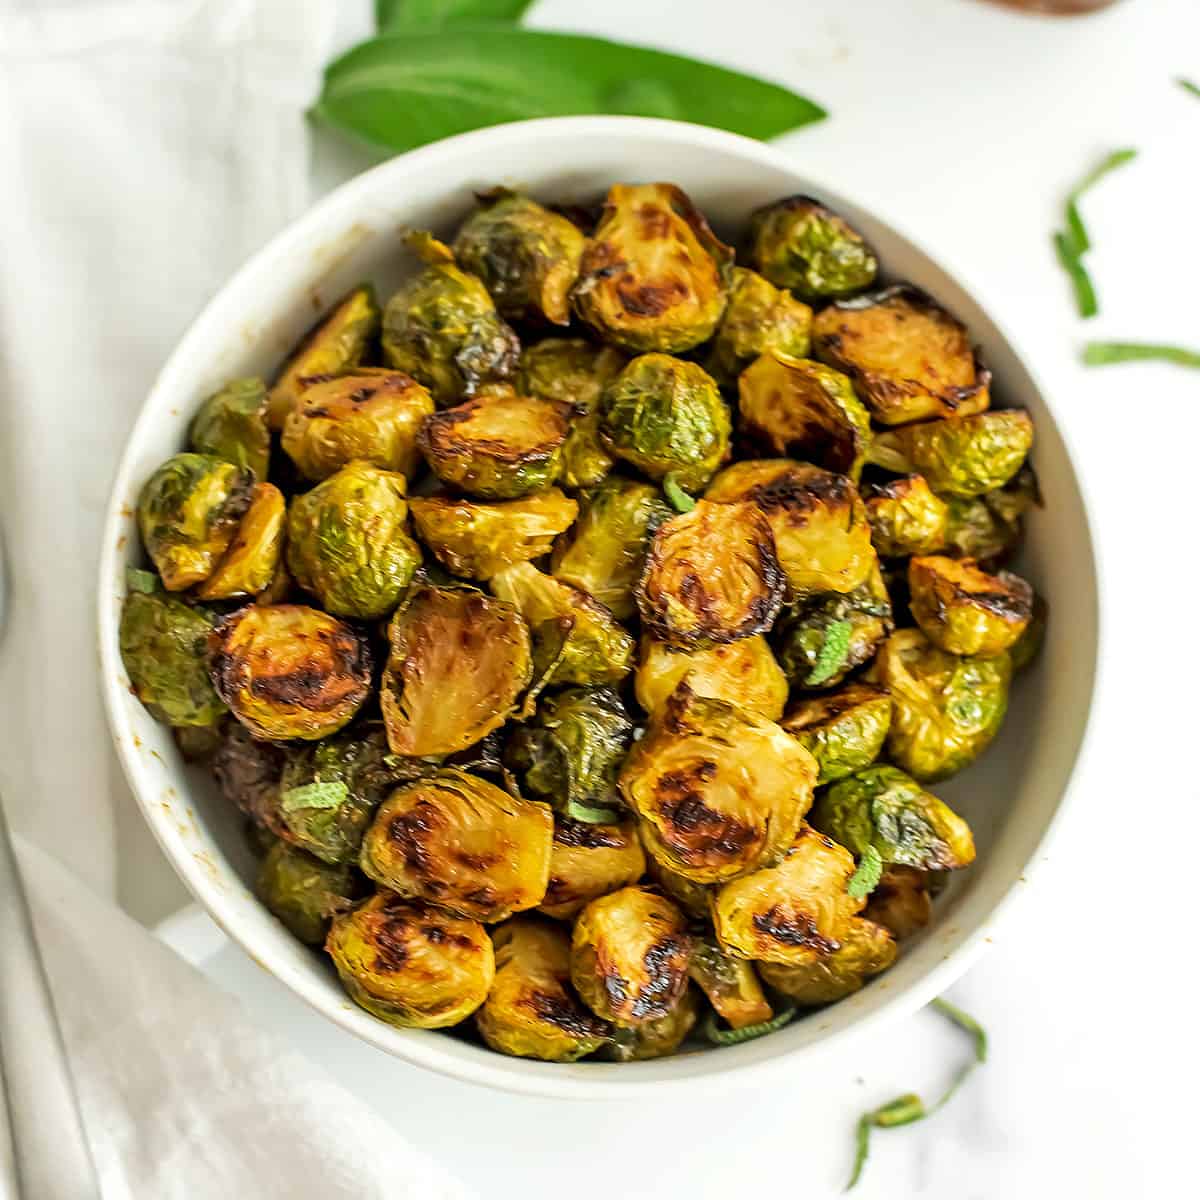 Maple dijon mustard brussel sprouts in a white bowl.